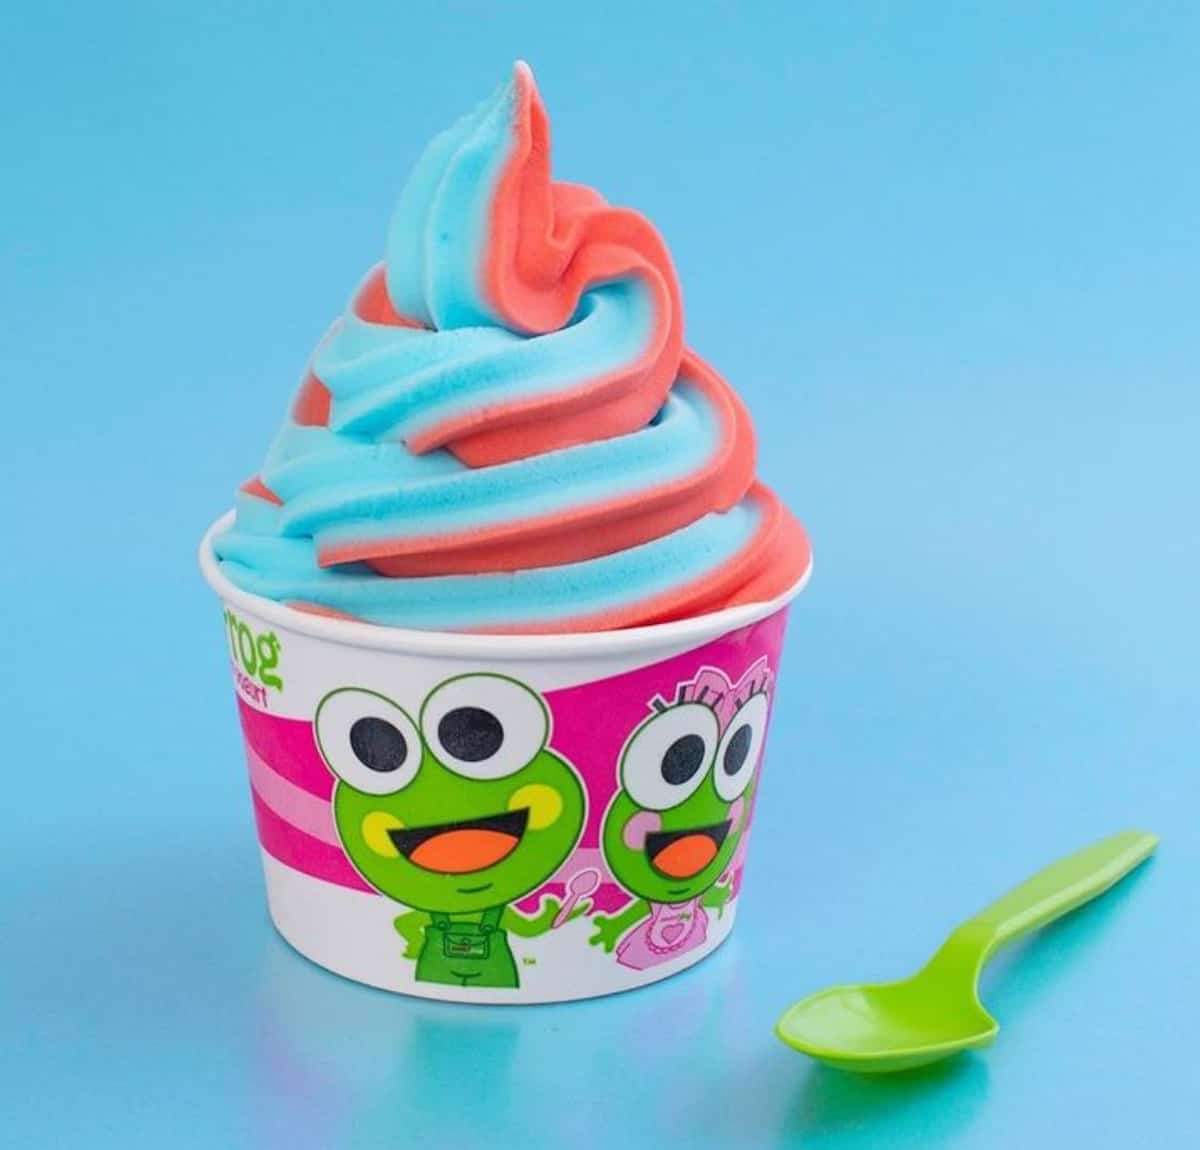 A vegan frozen treat cup from sweetFrog.